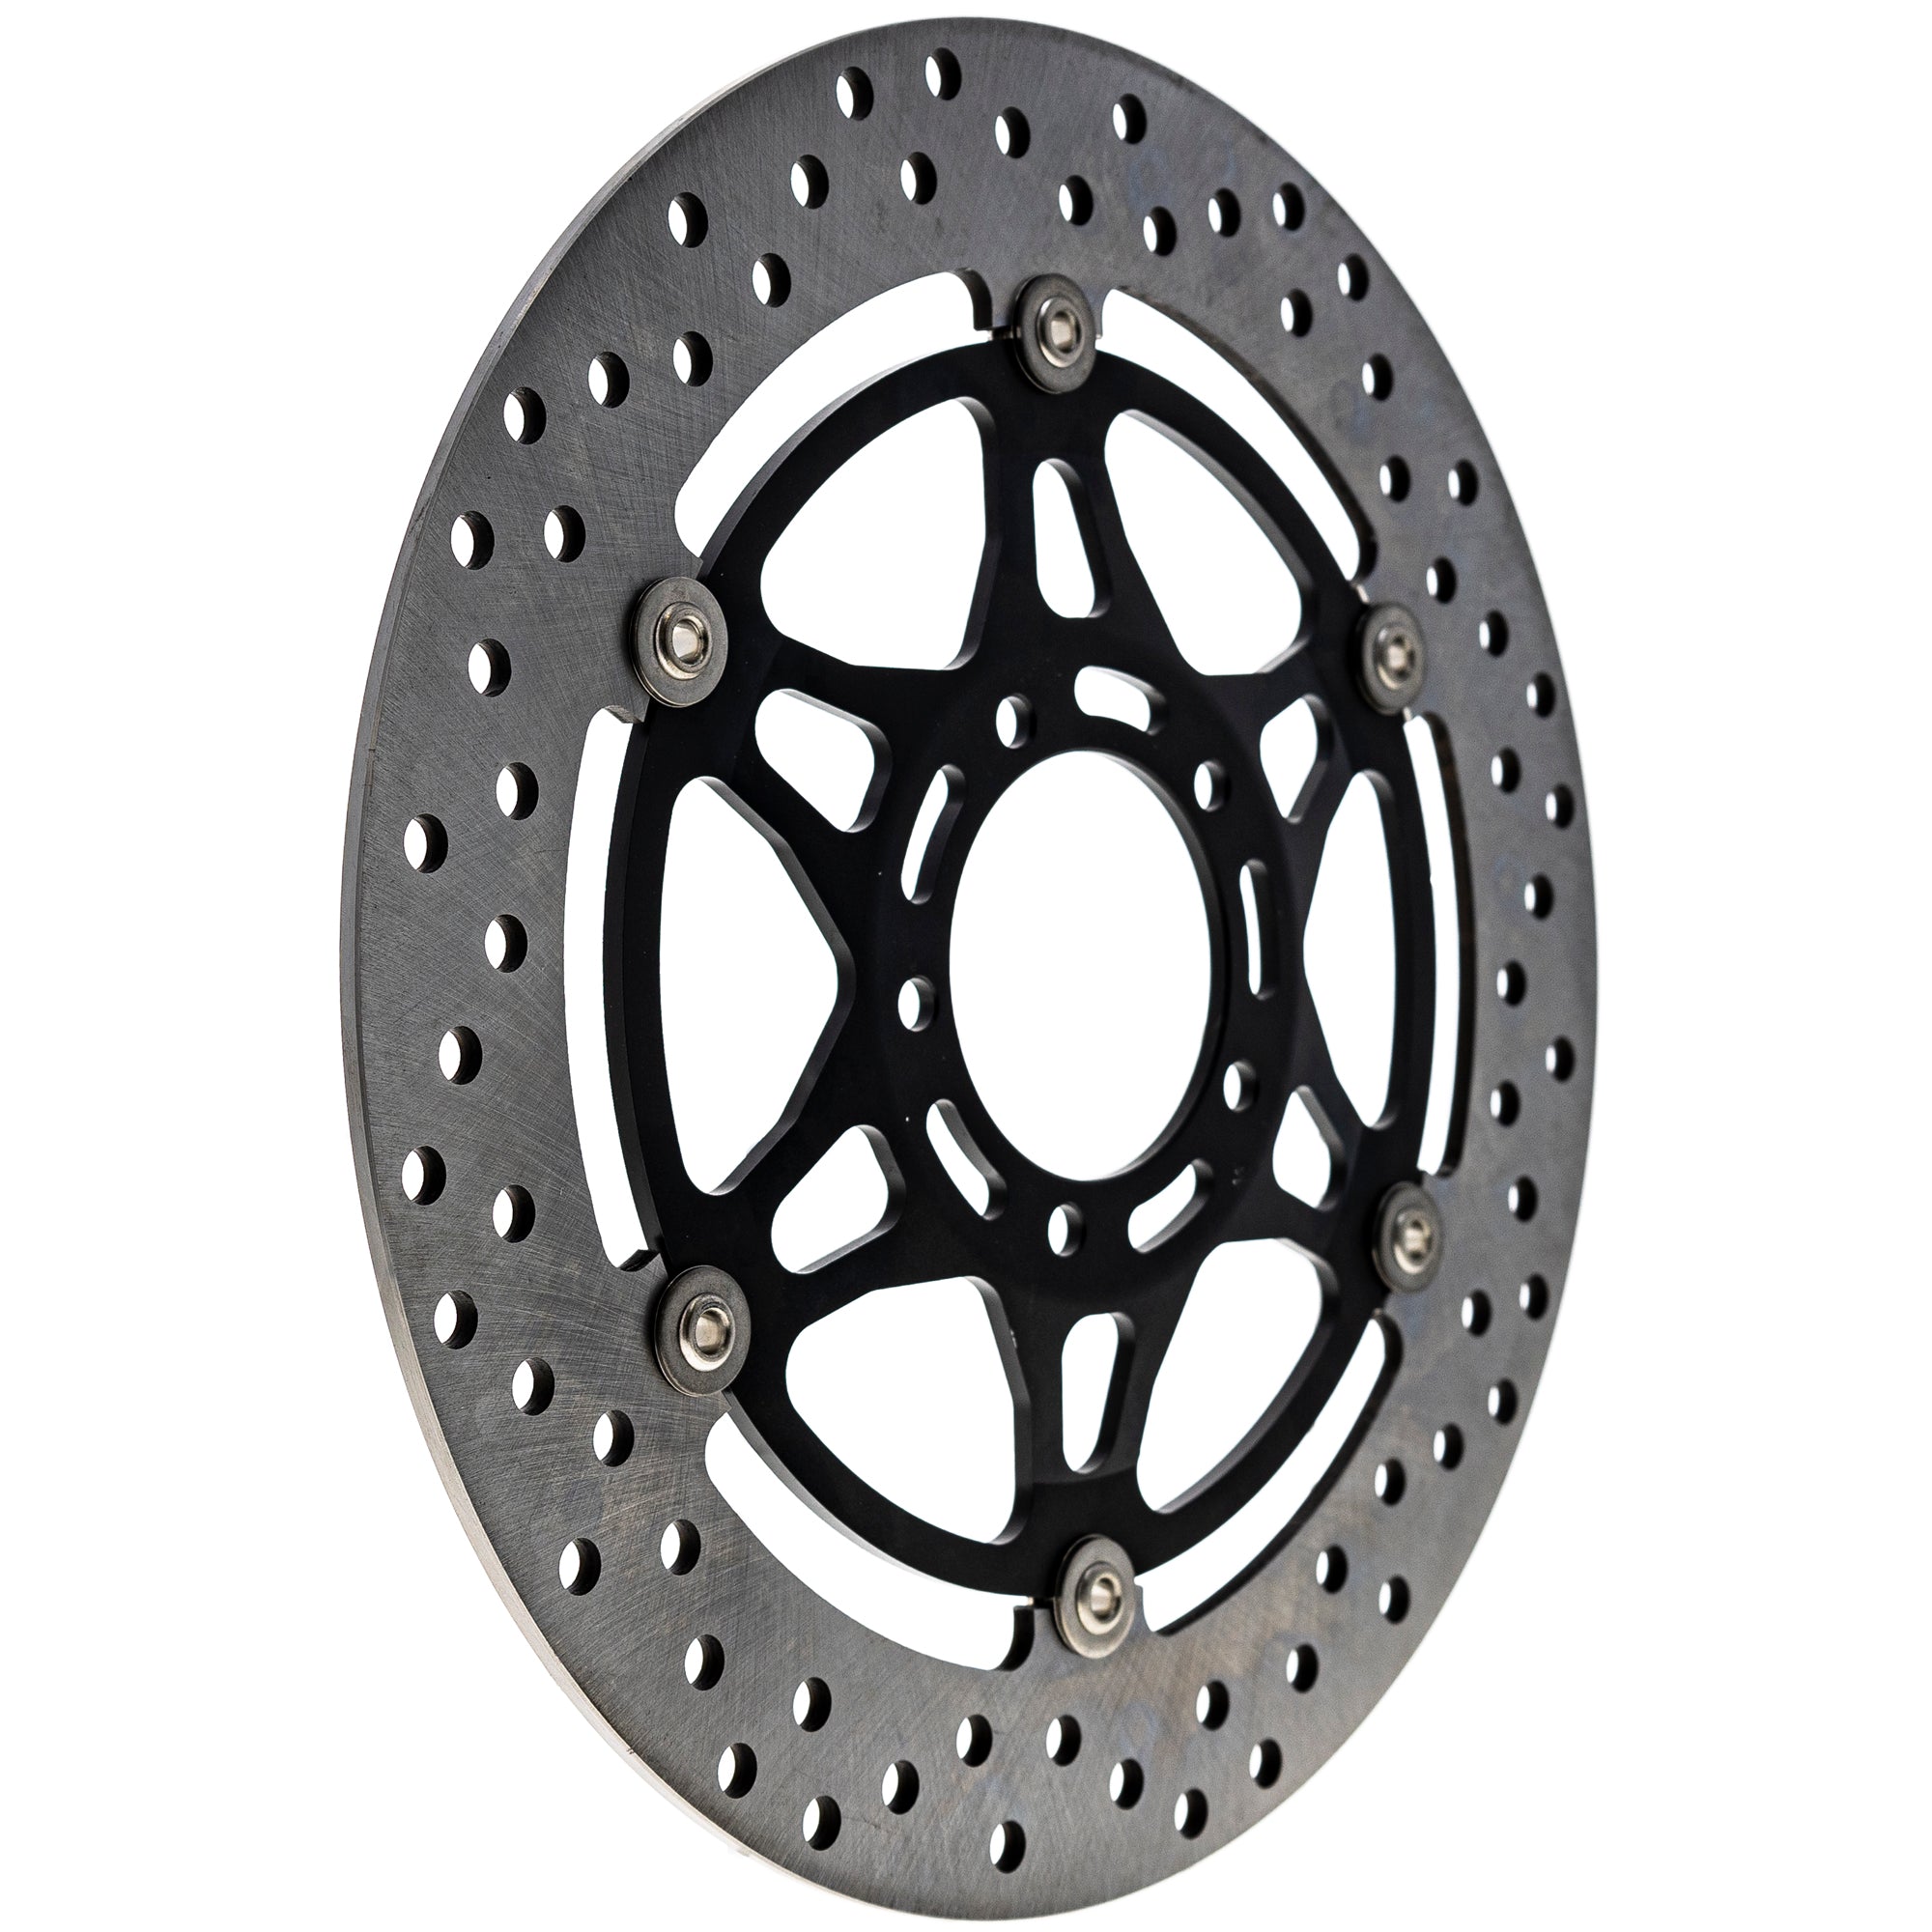 Brake Rotor 519-CRT2383R For Ducati 49241551A 49241351A 49241341A 49241131A 49241121A 49241011A